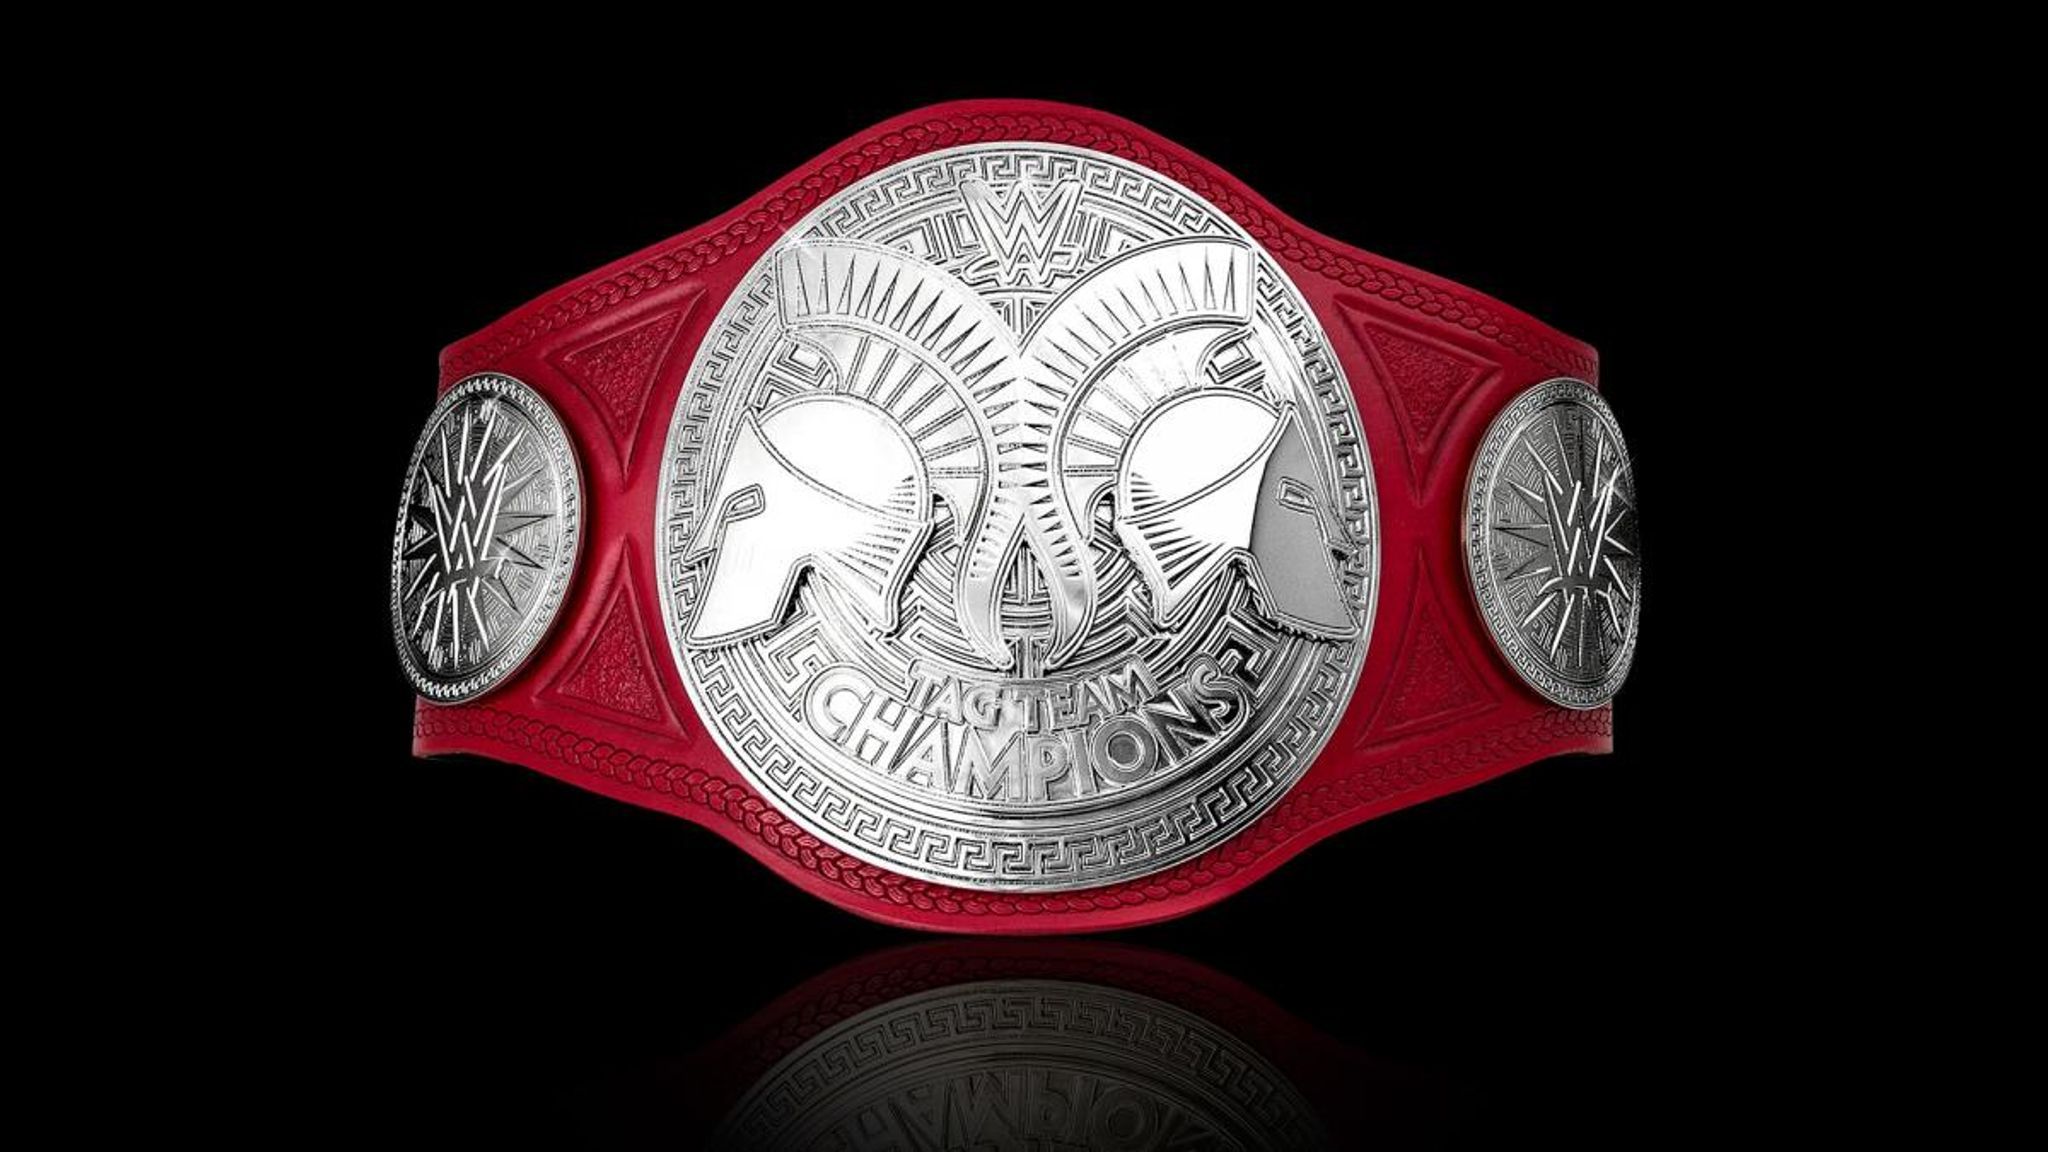 WWE Raw: New Tag Team Titles presented to Sheamus and Cesaro